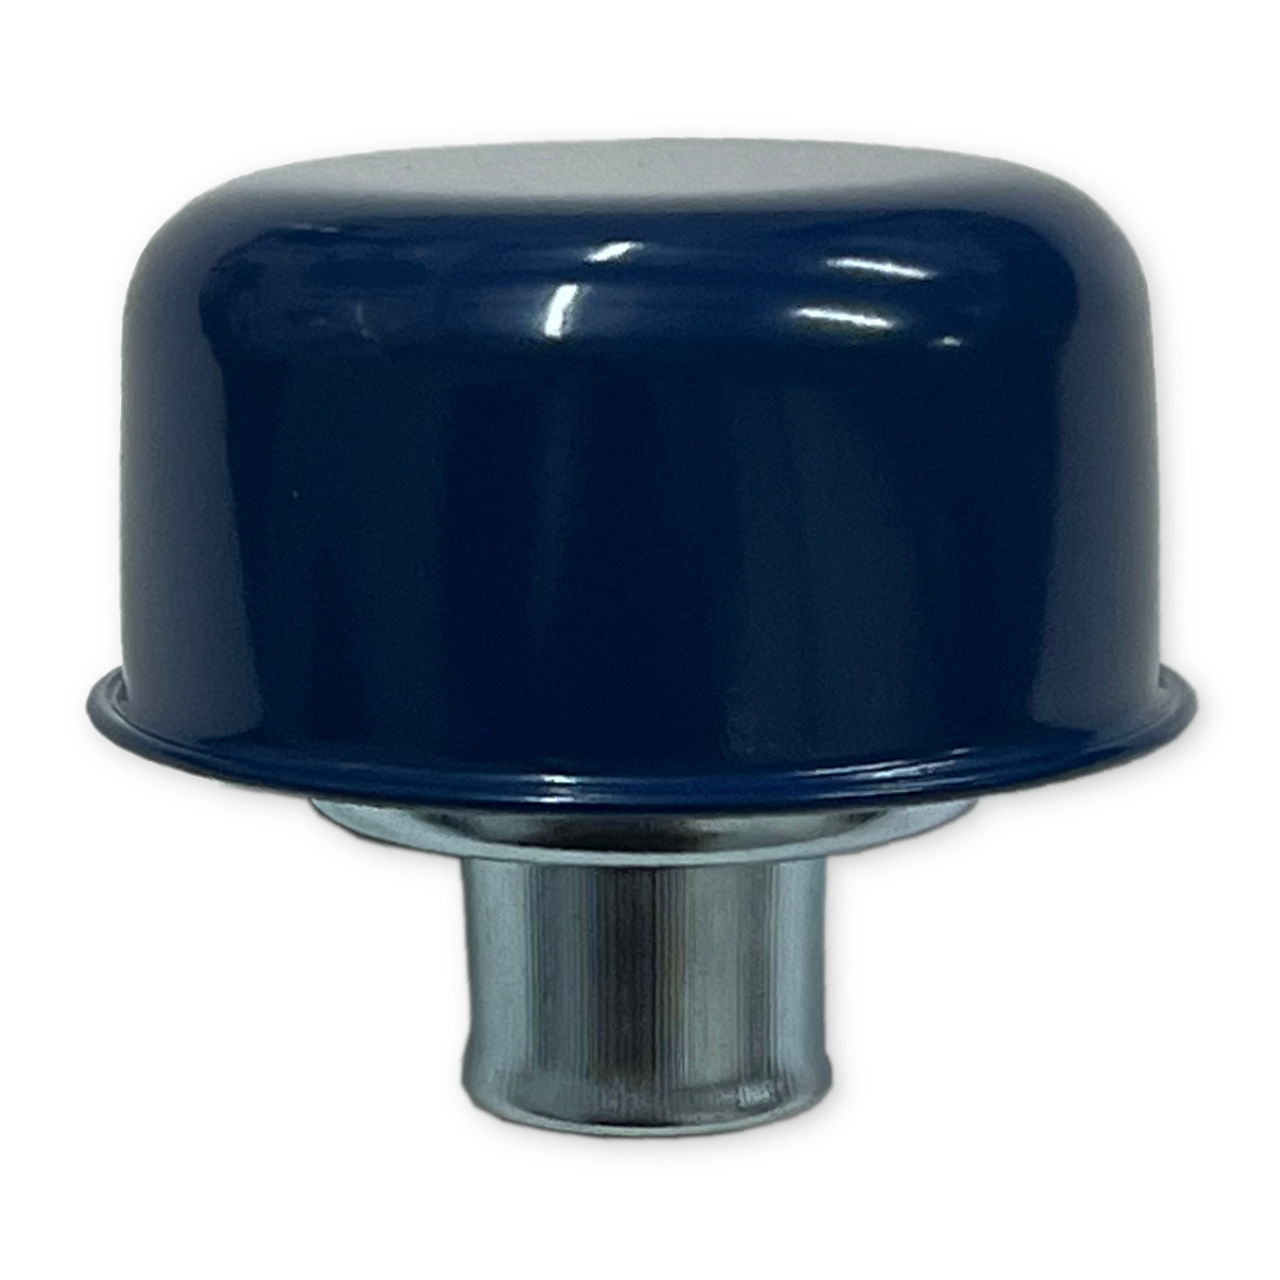 Blue Valve Cover Breather Cap, Fits Ford/Chevy/Mopar Small or Big Block